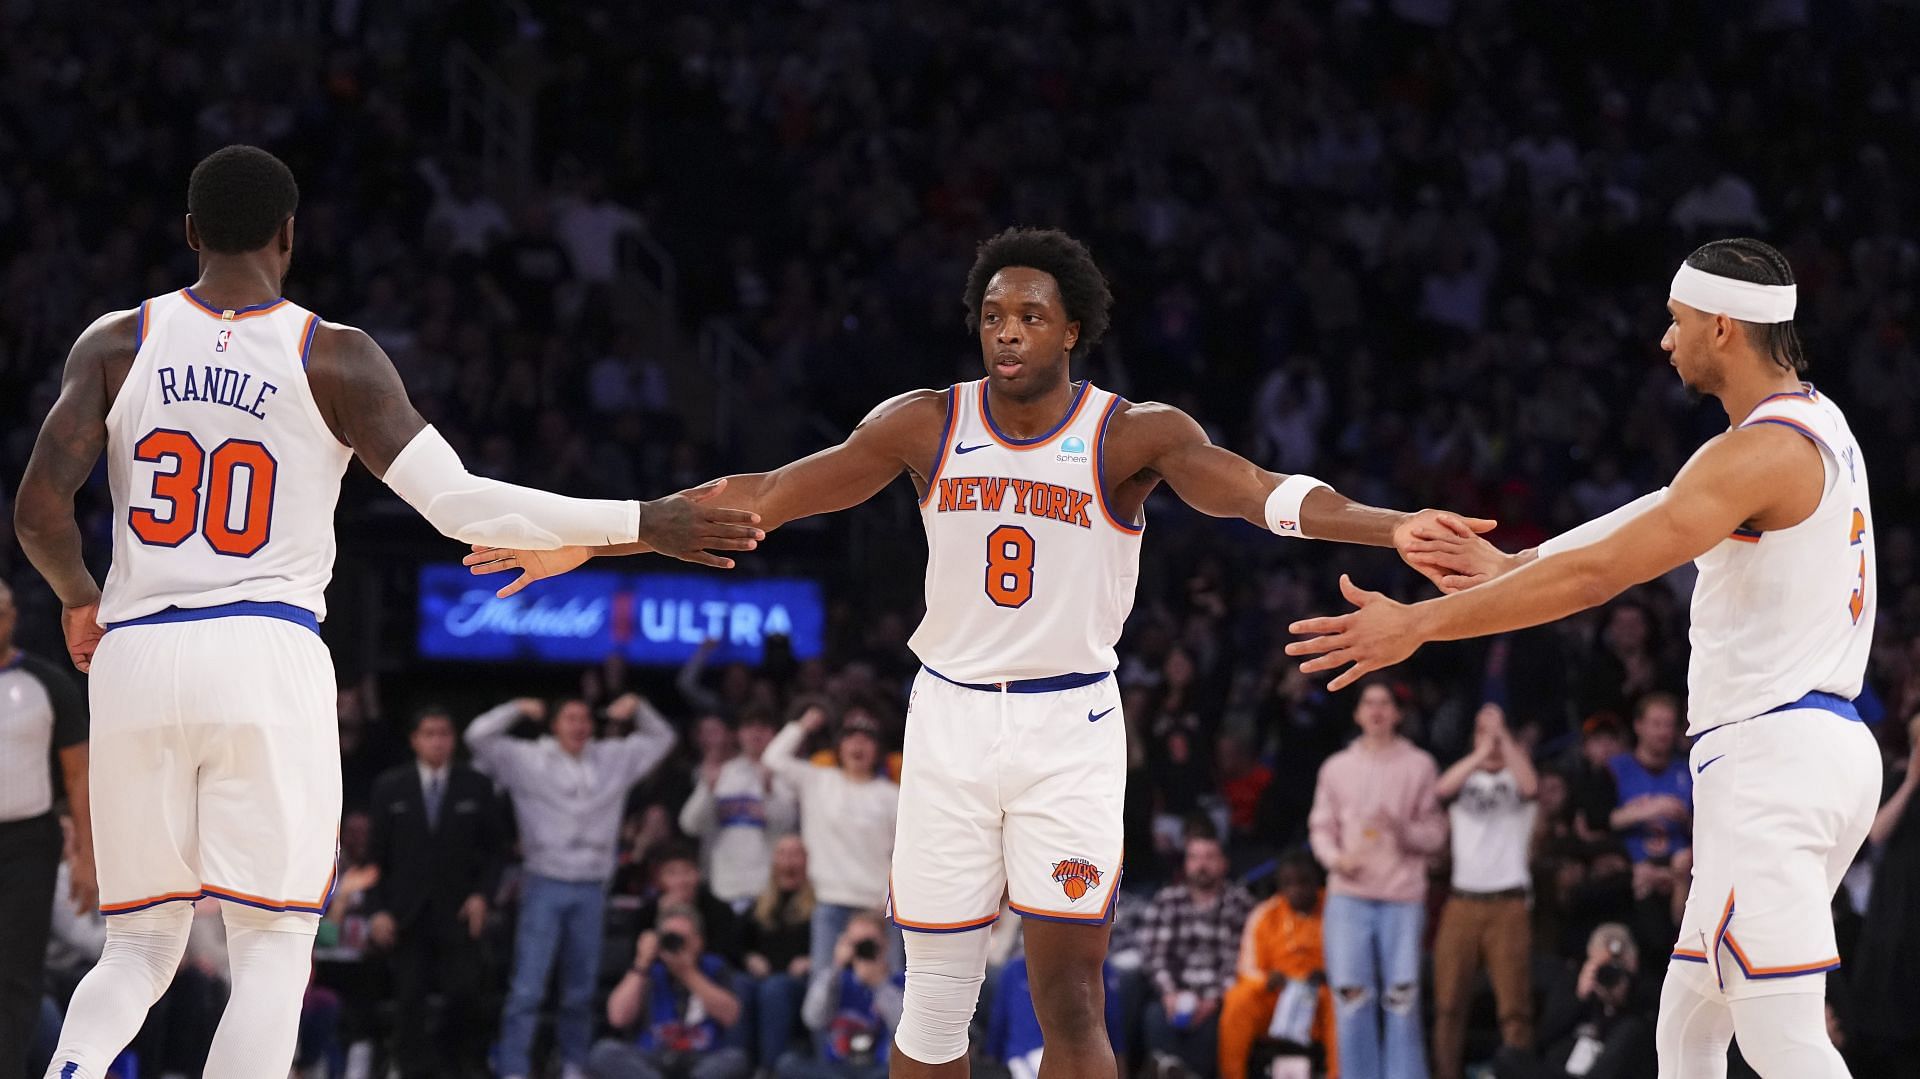 Julius Randle had nothing but praise for OG Anunoby in his New York Knicks debut.